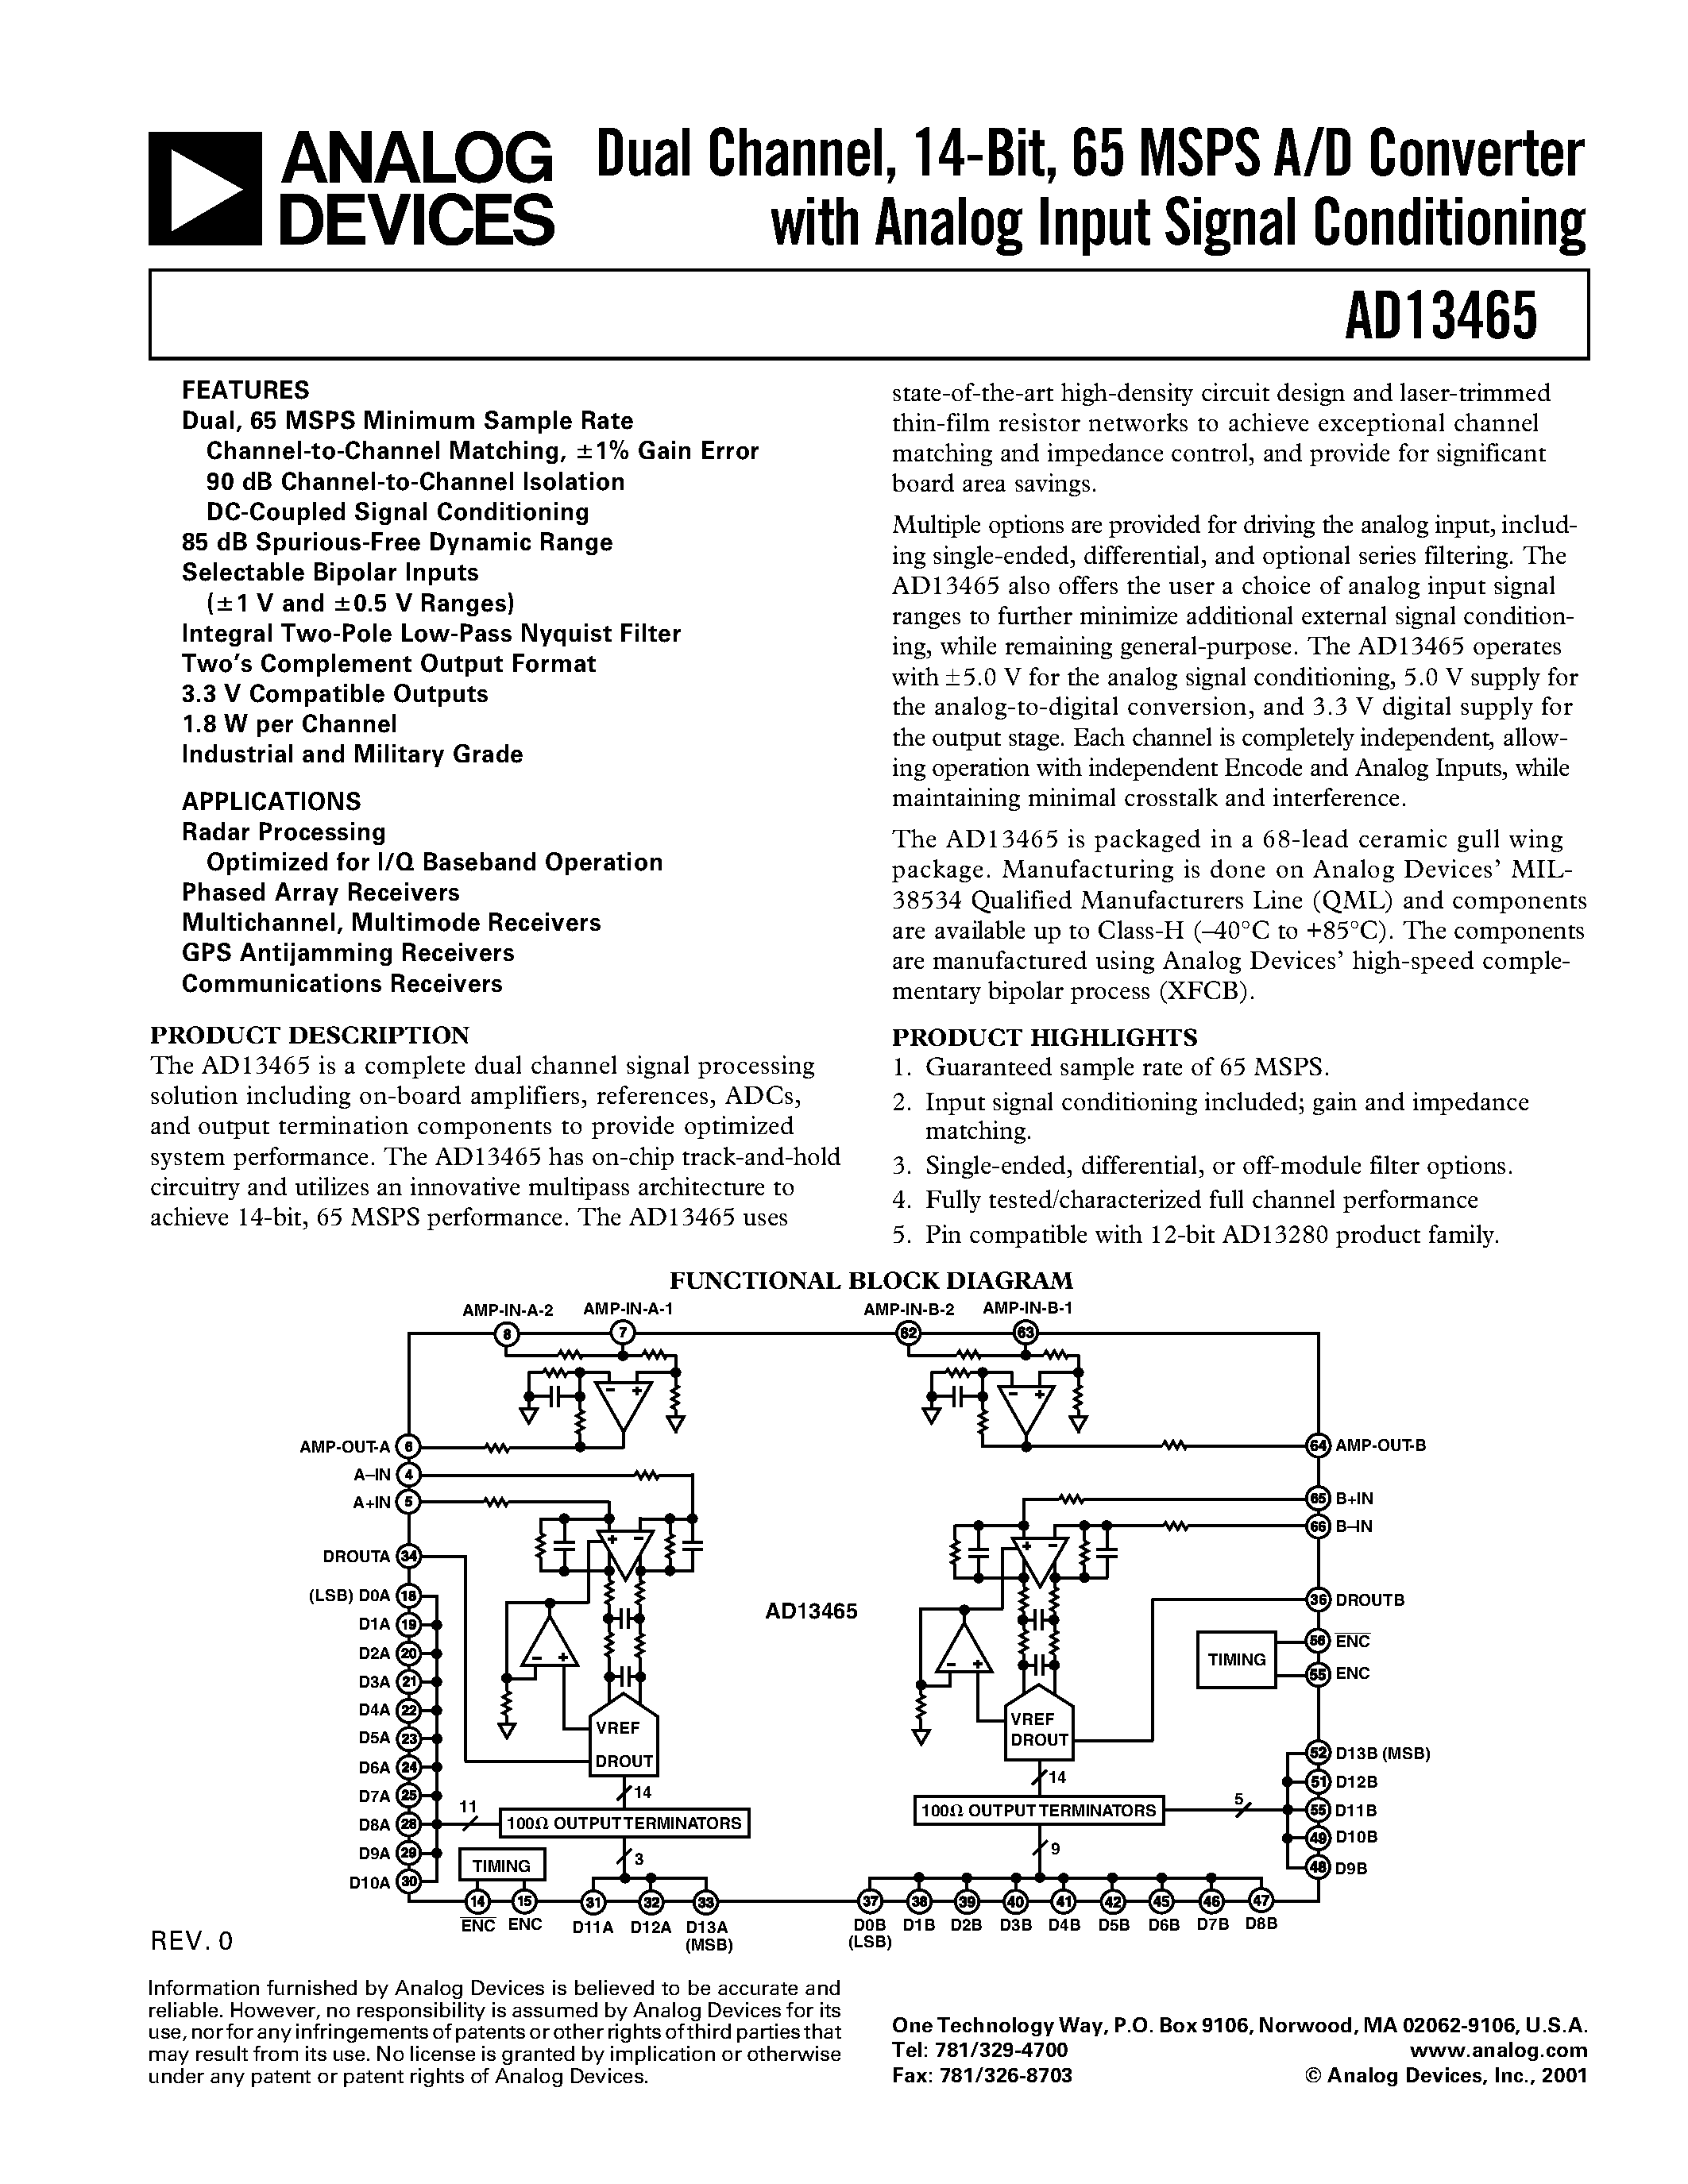 Datasheet AD13465AF - Dual Channel/ 14-Bit/ 65 MSPS A/D Converter with Analog Input Signal Conditioning page 1